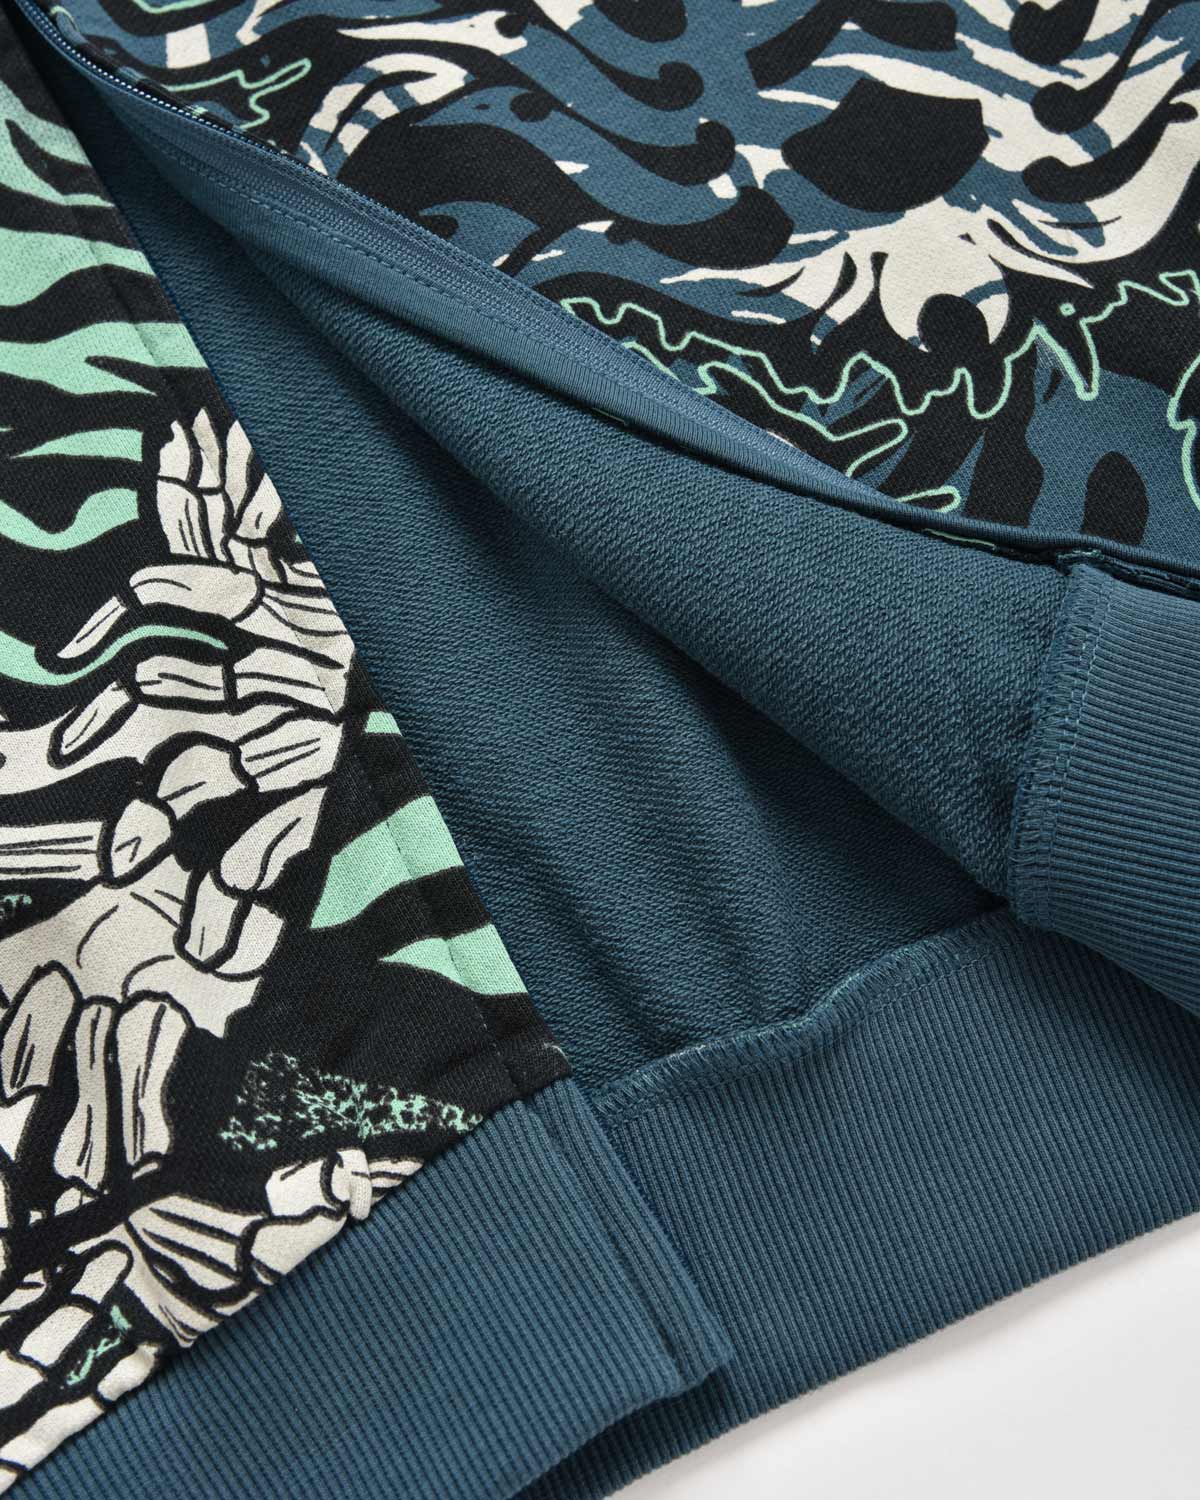 Kid | "Hell Of A Surfer" All-Over Print Sweatshirt 100% Petrol Color Cotton